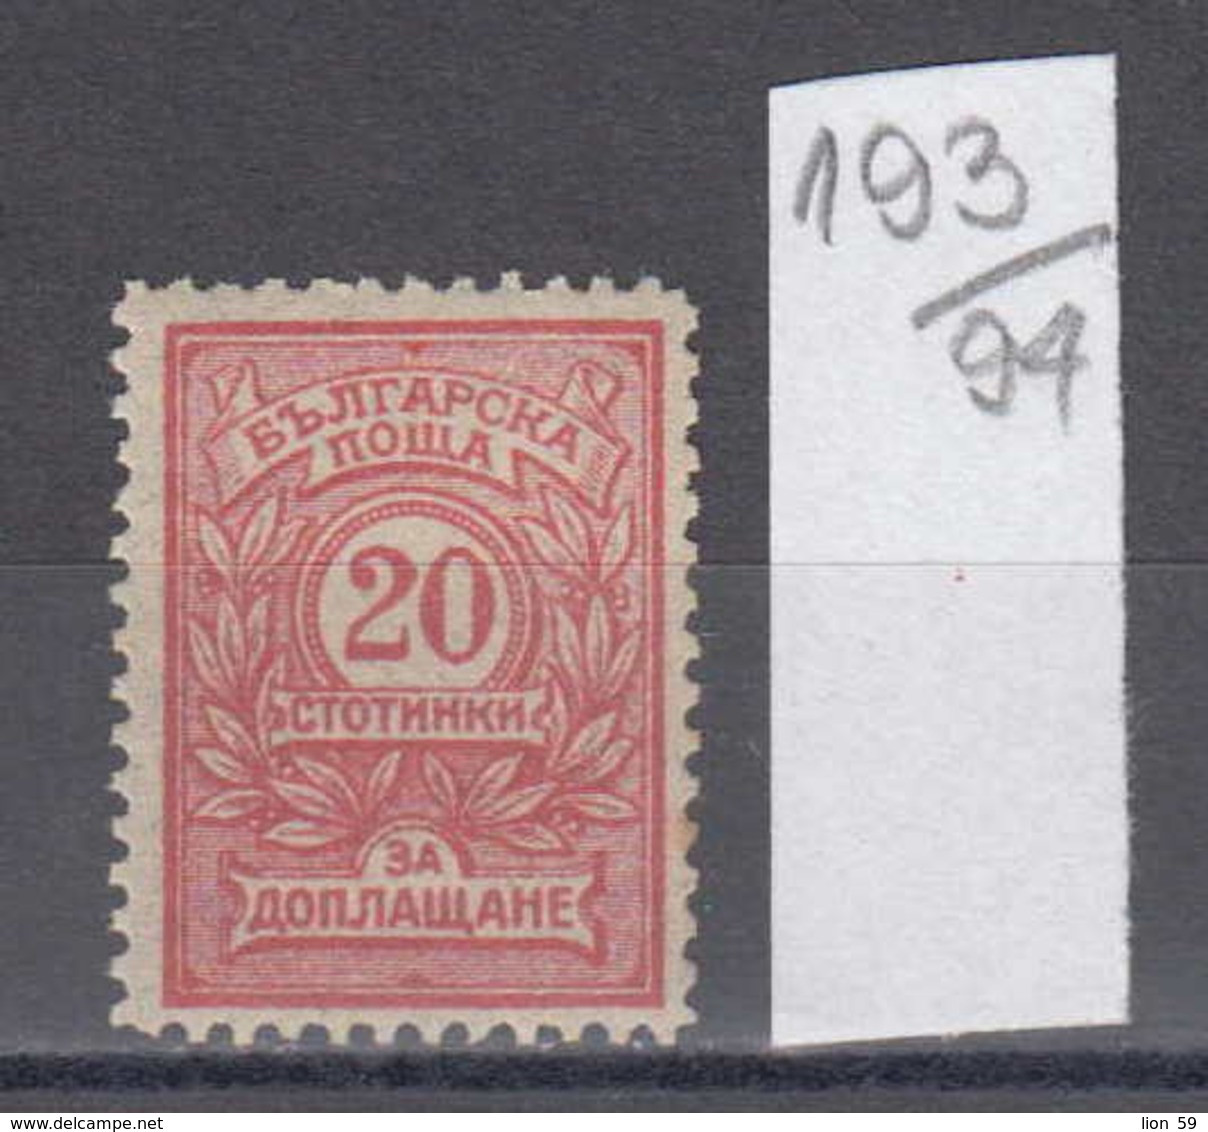 54K193 / T25 Bulgaria 1915 Michel Nr. 23 X - Timbres-taxe POSTAGE DUE Portomarken , Ziffernzeichnung  ** MNH - Timbres-taxe